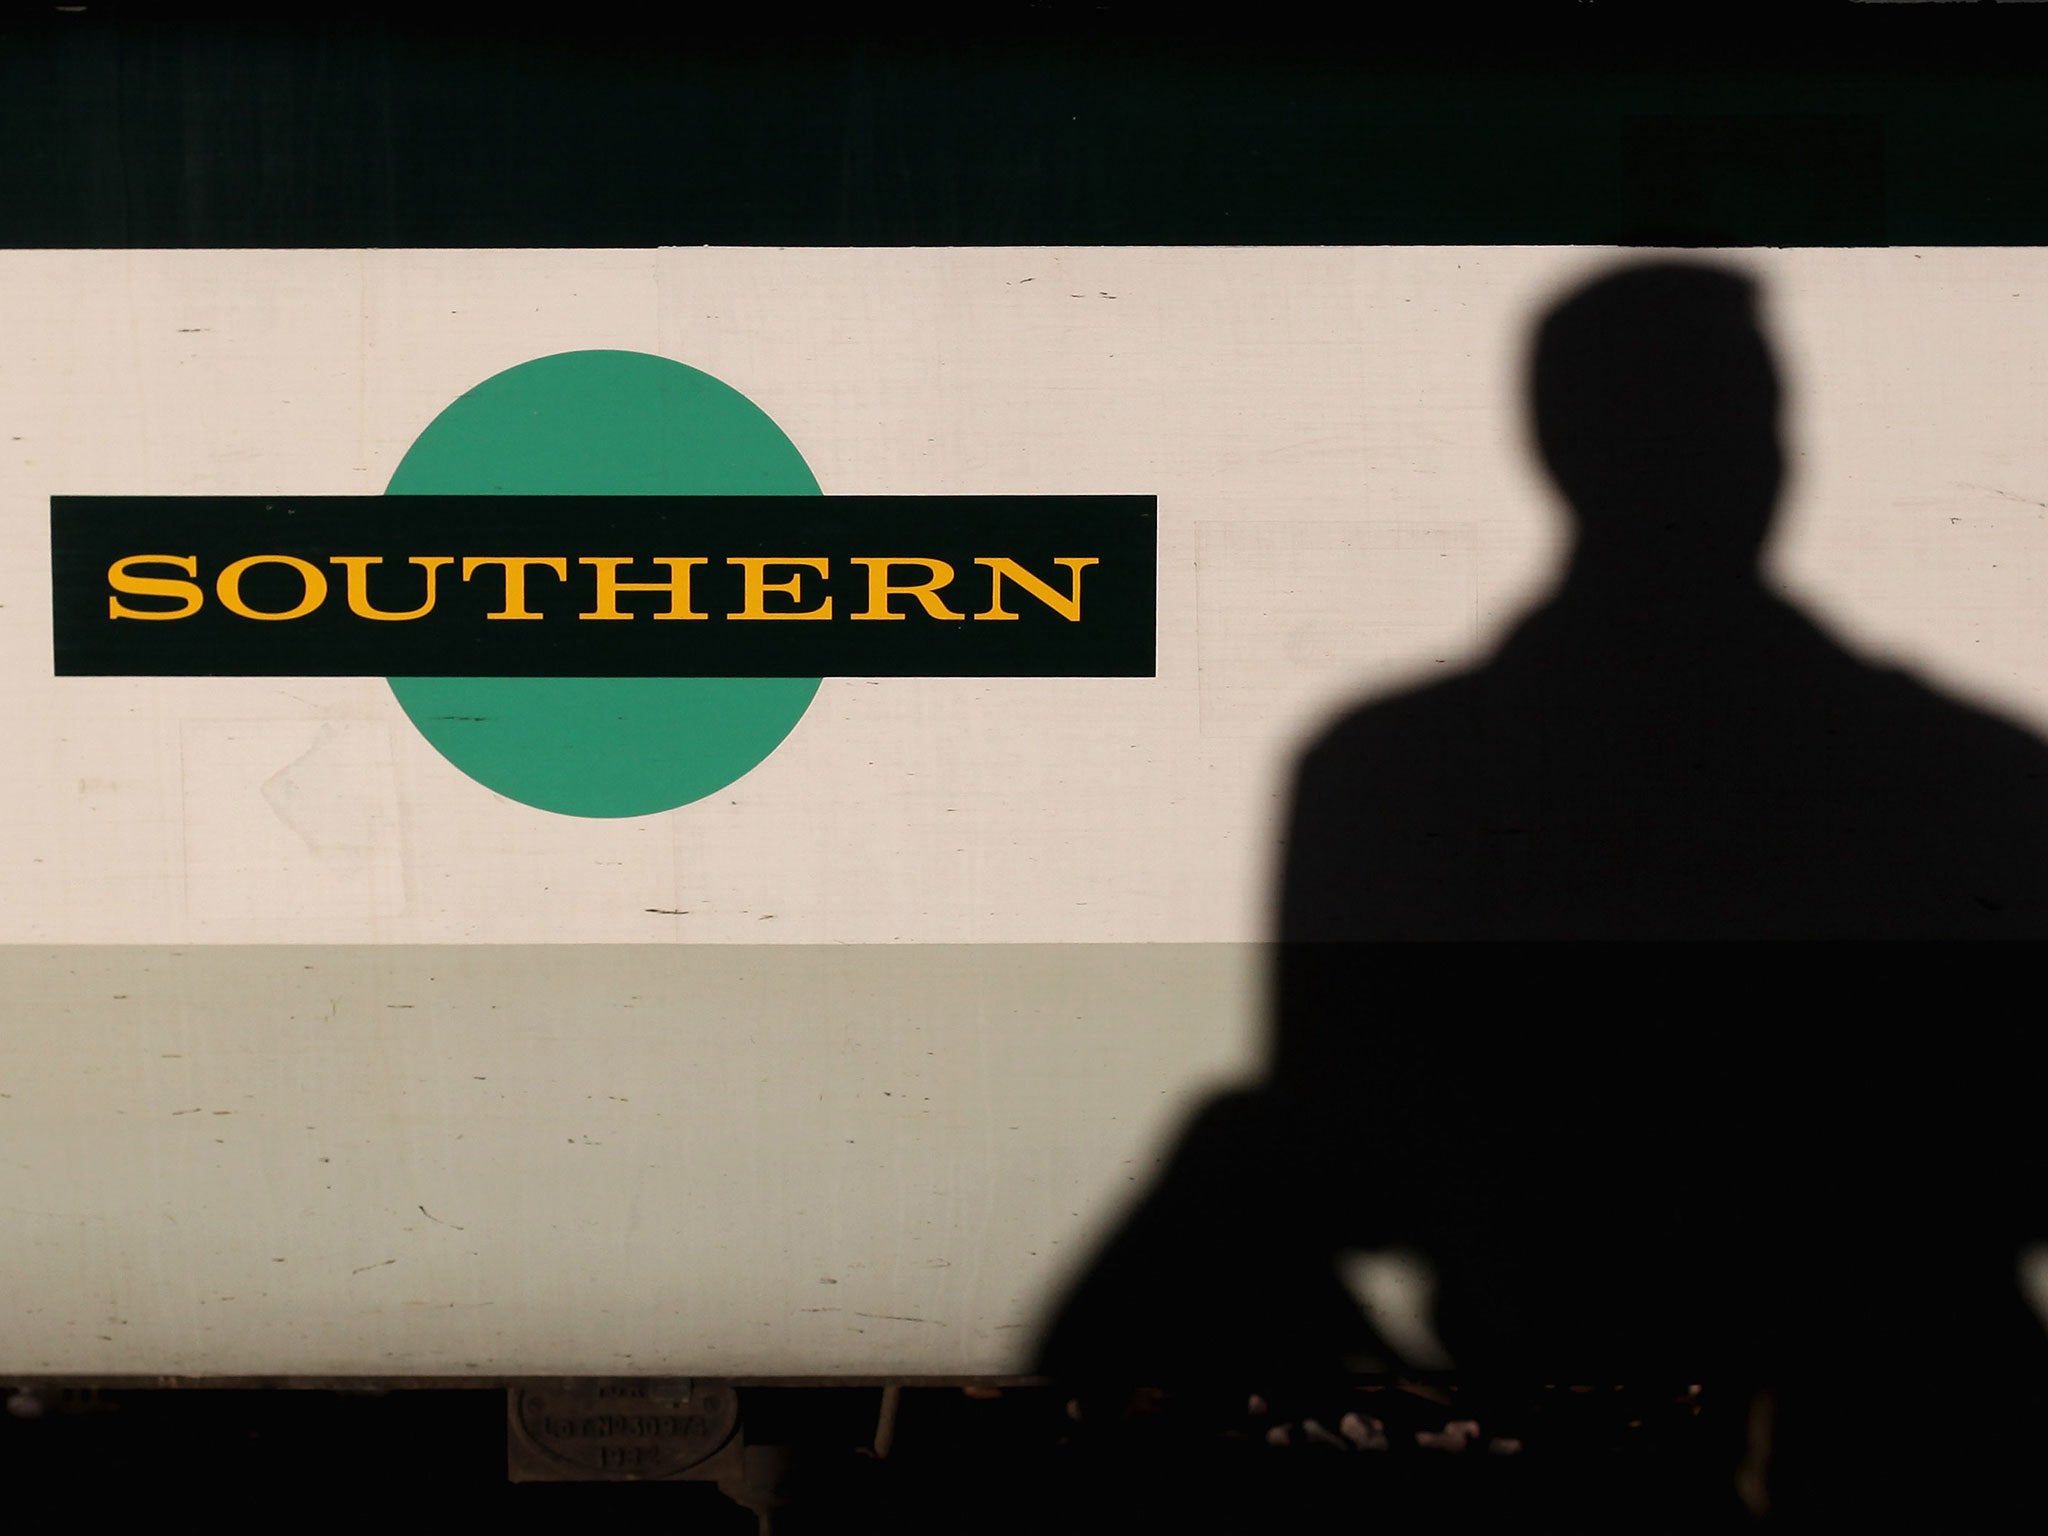 Southern trains were on time less than half of the time